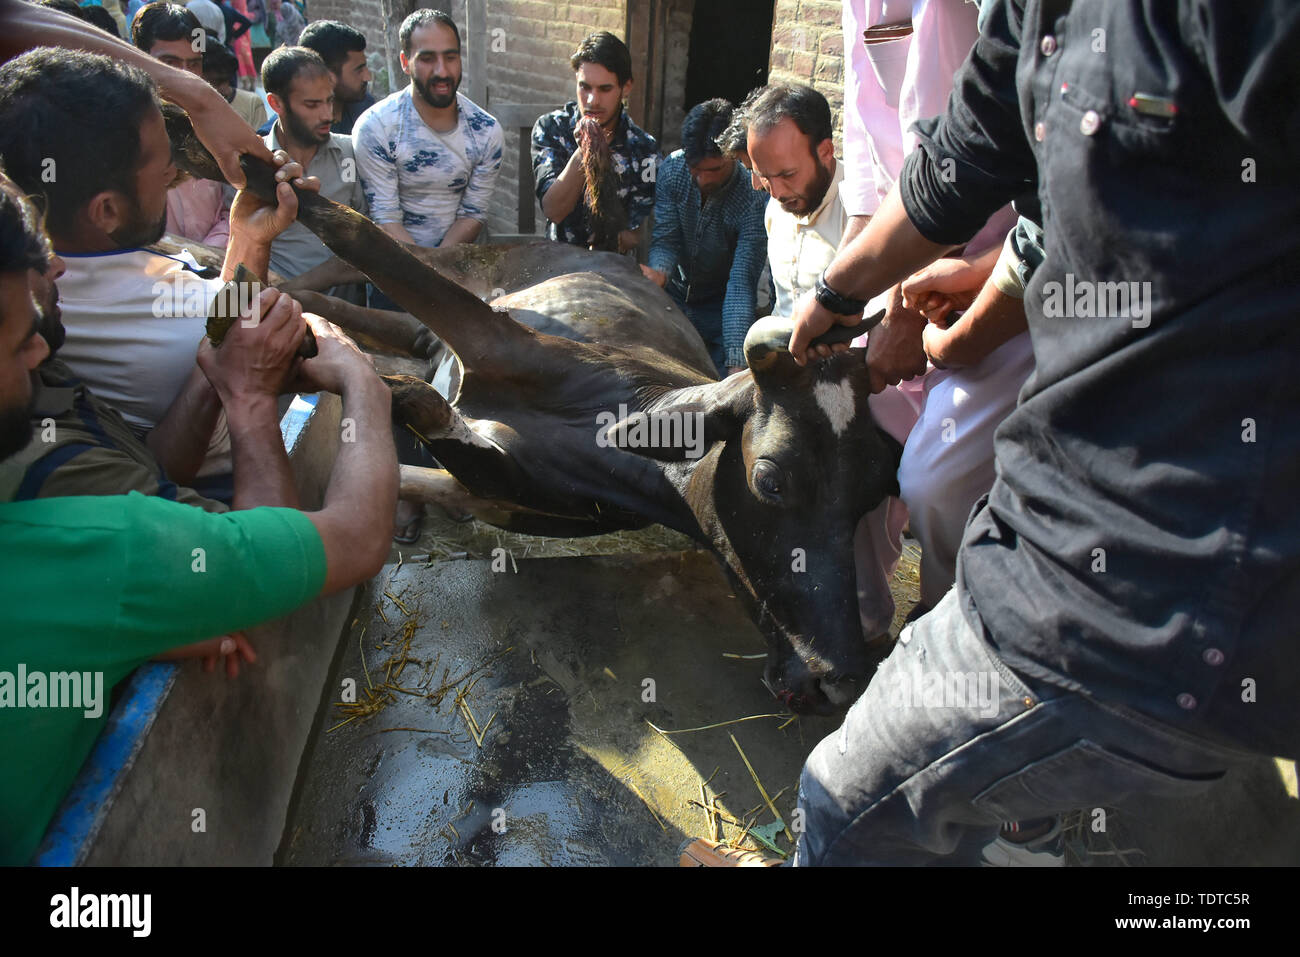 June 18, 2019 - Anantnag, Kashmir.18 June 2019. Locals remove the carcass of a cow believed to have been shot by Indian forces in the Mahrhama village of the Anantnag District in Indian Administered Kashmir. The dead cow was shot during counter-insurgency operations by the lndian forces looking for Sajad Ahmad Bhat, who was wanted by the authorities in connection with the deadly suicide attack responsible for the death of 40 paramilitary police officers on 14 February. Sajad Ahmad Bhat and his associate Tawseef Ahmed Bhat were killed during a Monday overnight encounter with Indian Forces. In a Stock Photo